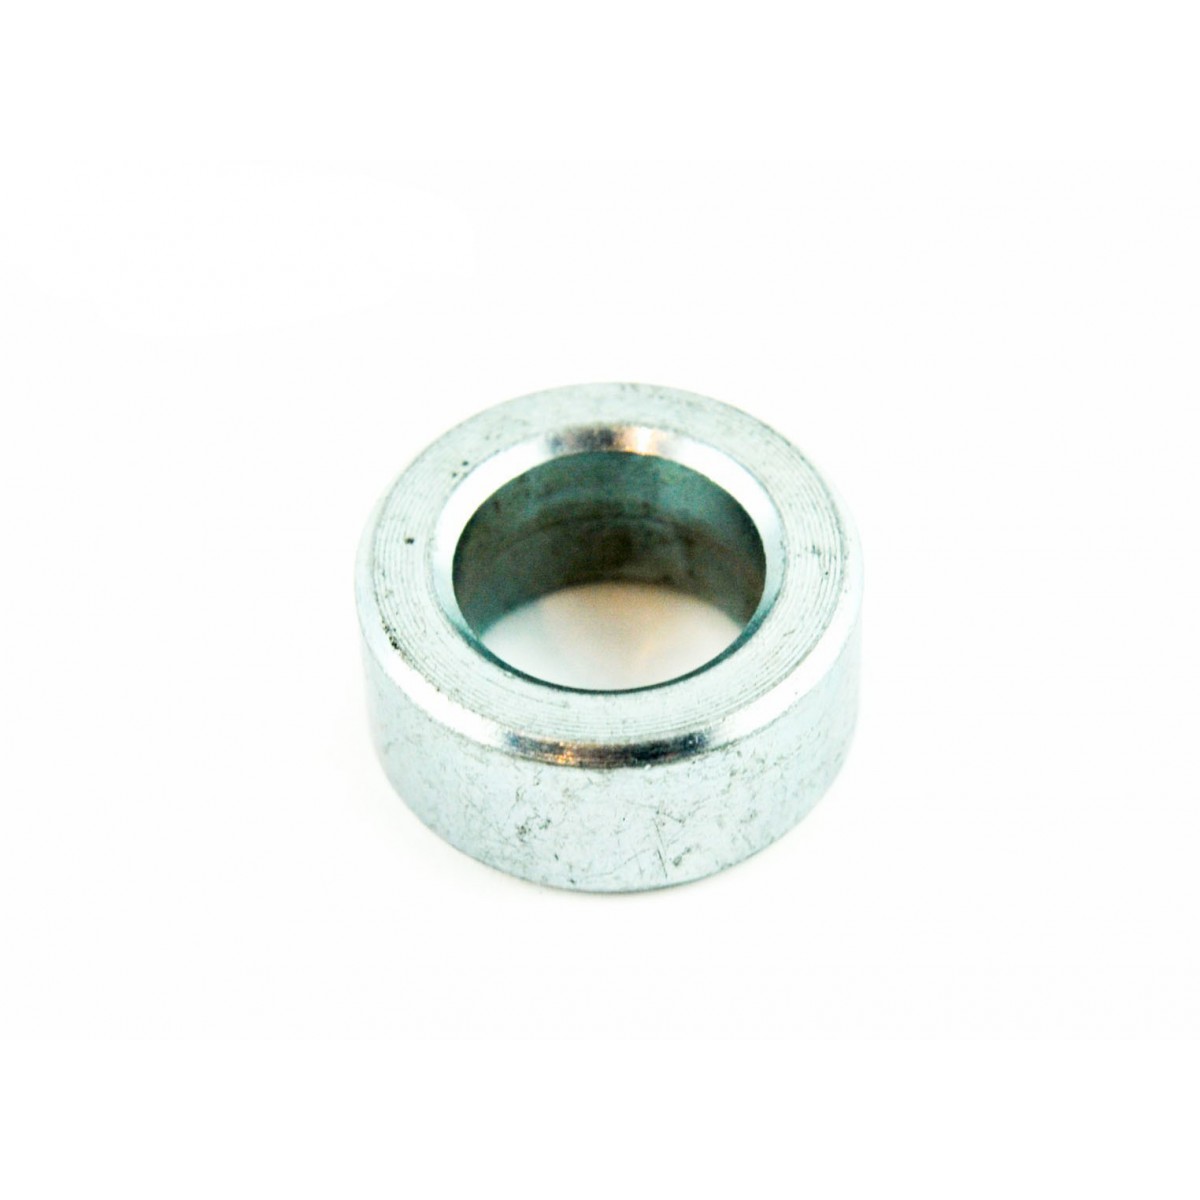 Spacer for mower blades on the M16 bolt